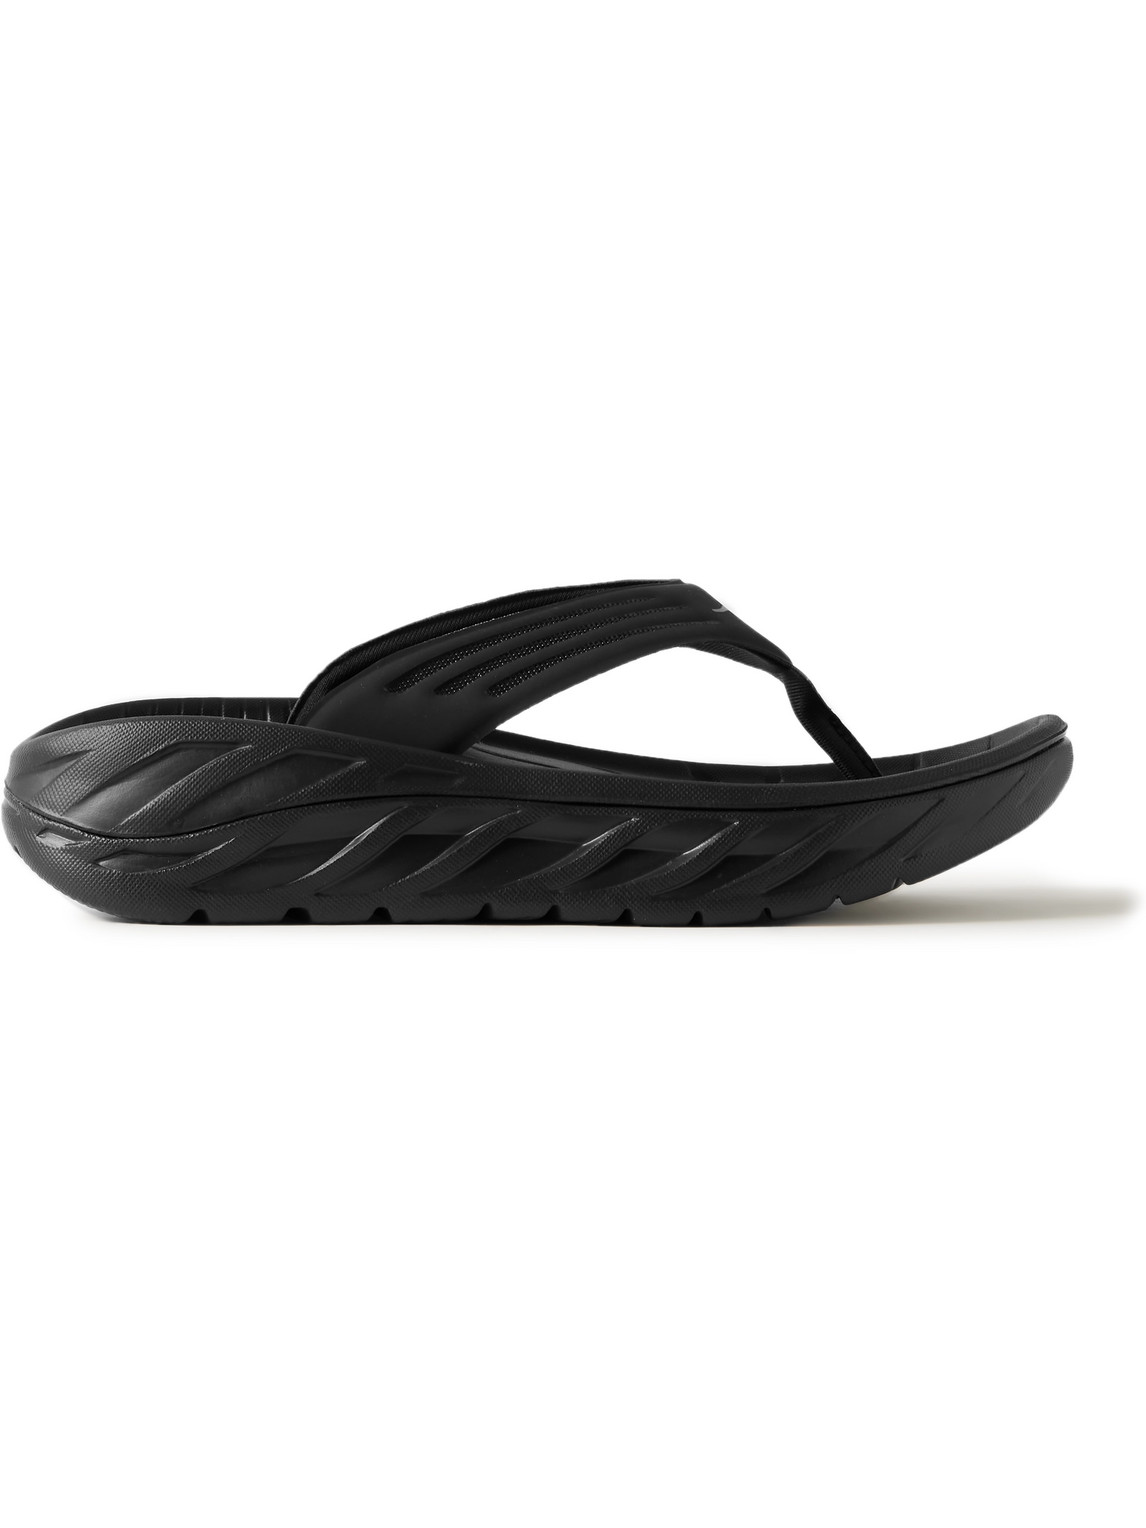 Hoka One One Ora Recovery Rubber Flip Flops In Black